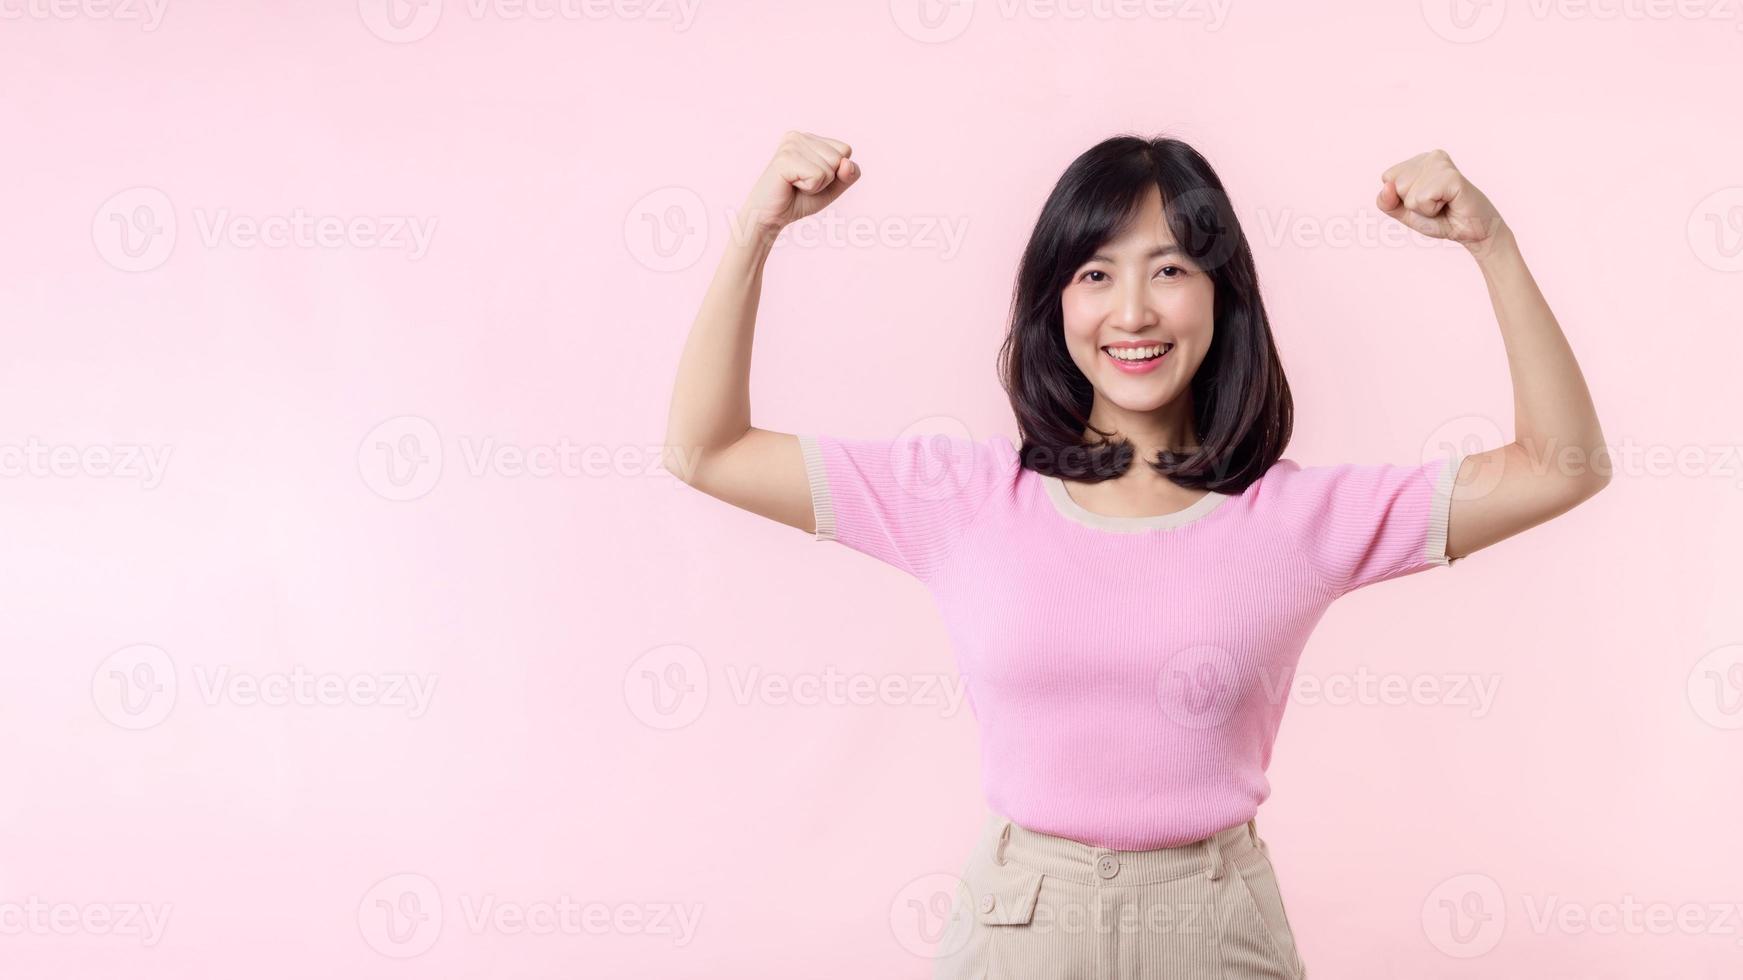 Portrait young asian woman proud and confident showing strong muscle strength arms flexed posing, feels about her success achievement. Women empowerment, equality, healthy strength and courage concept photo